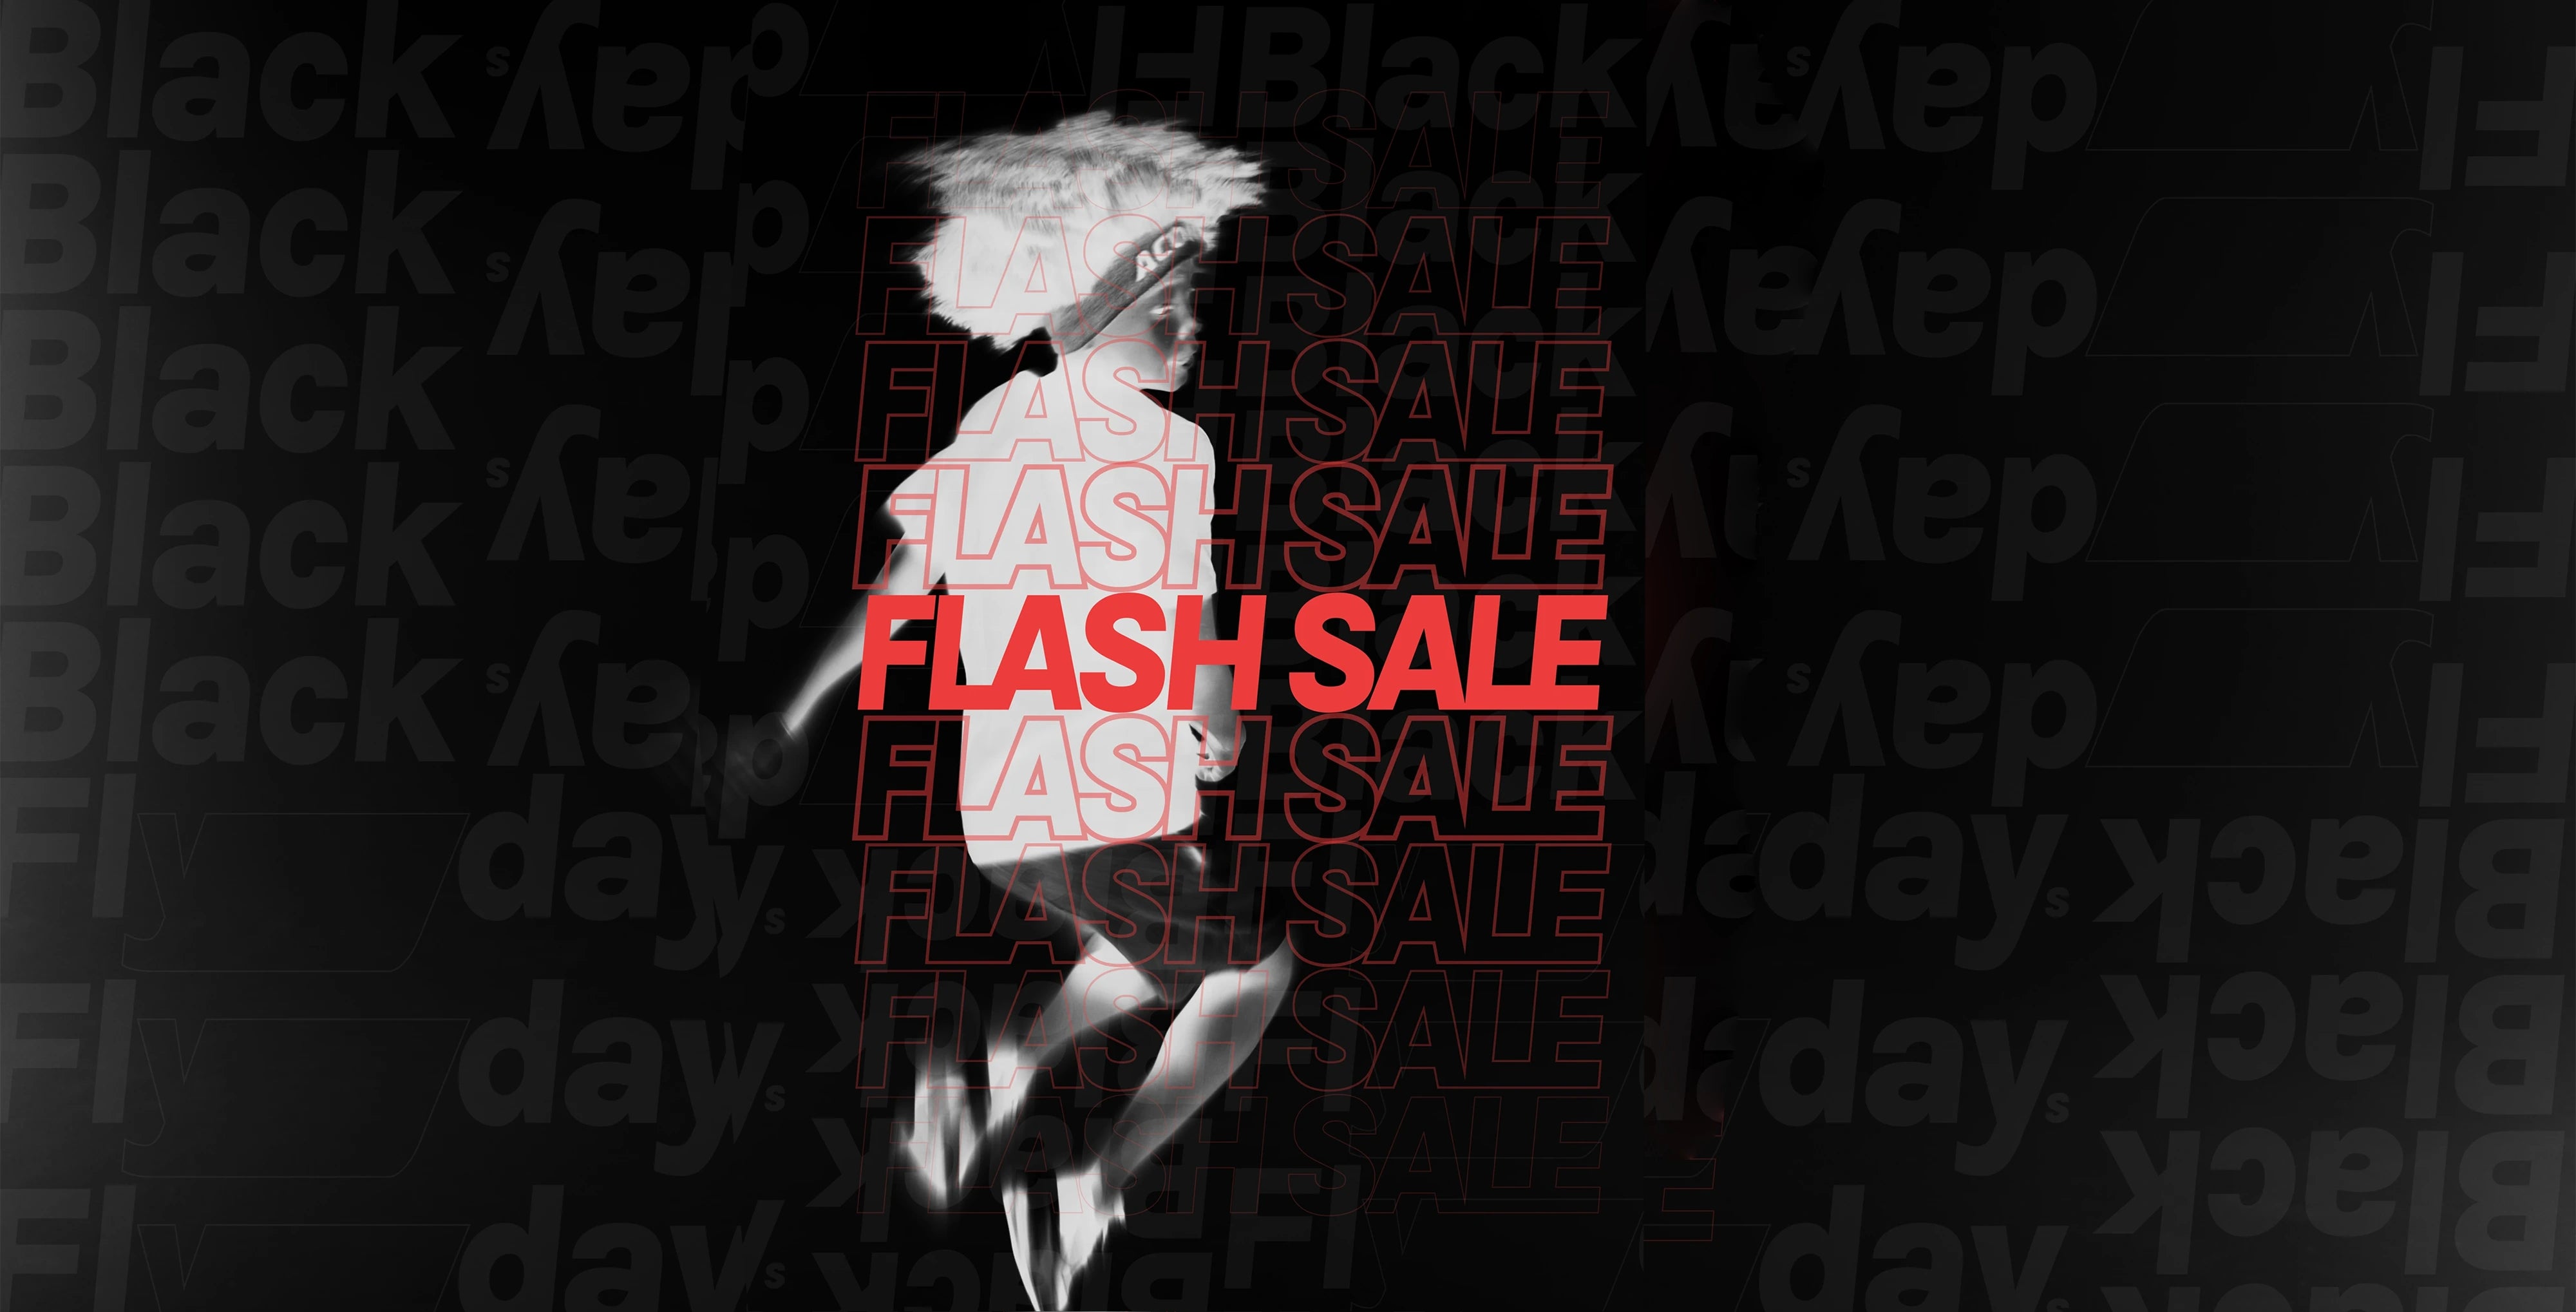 Negative image of a boy jumping, with FLASH SALE text on top.